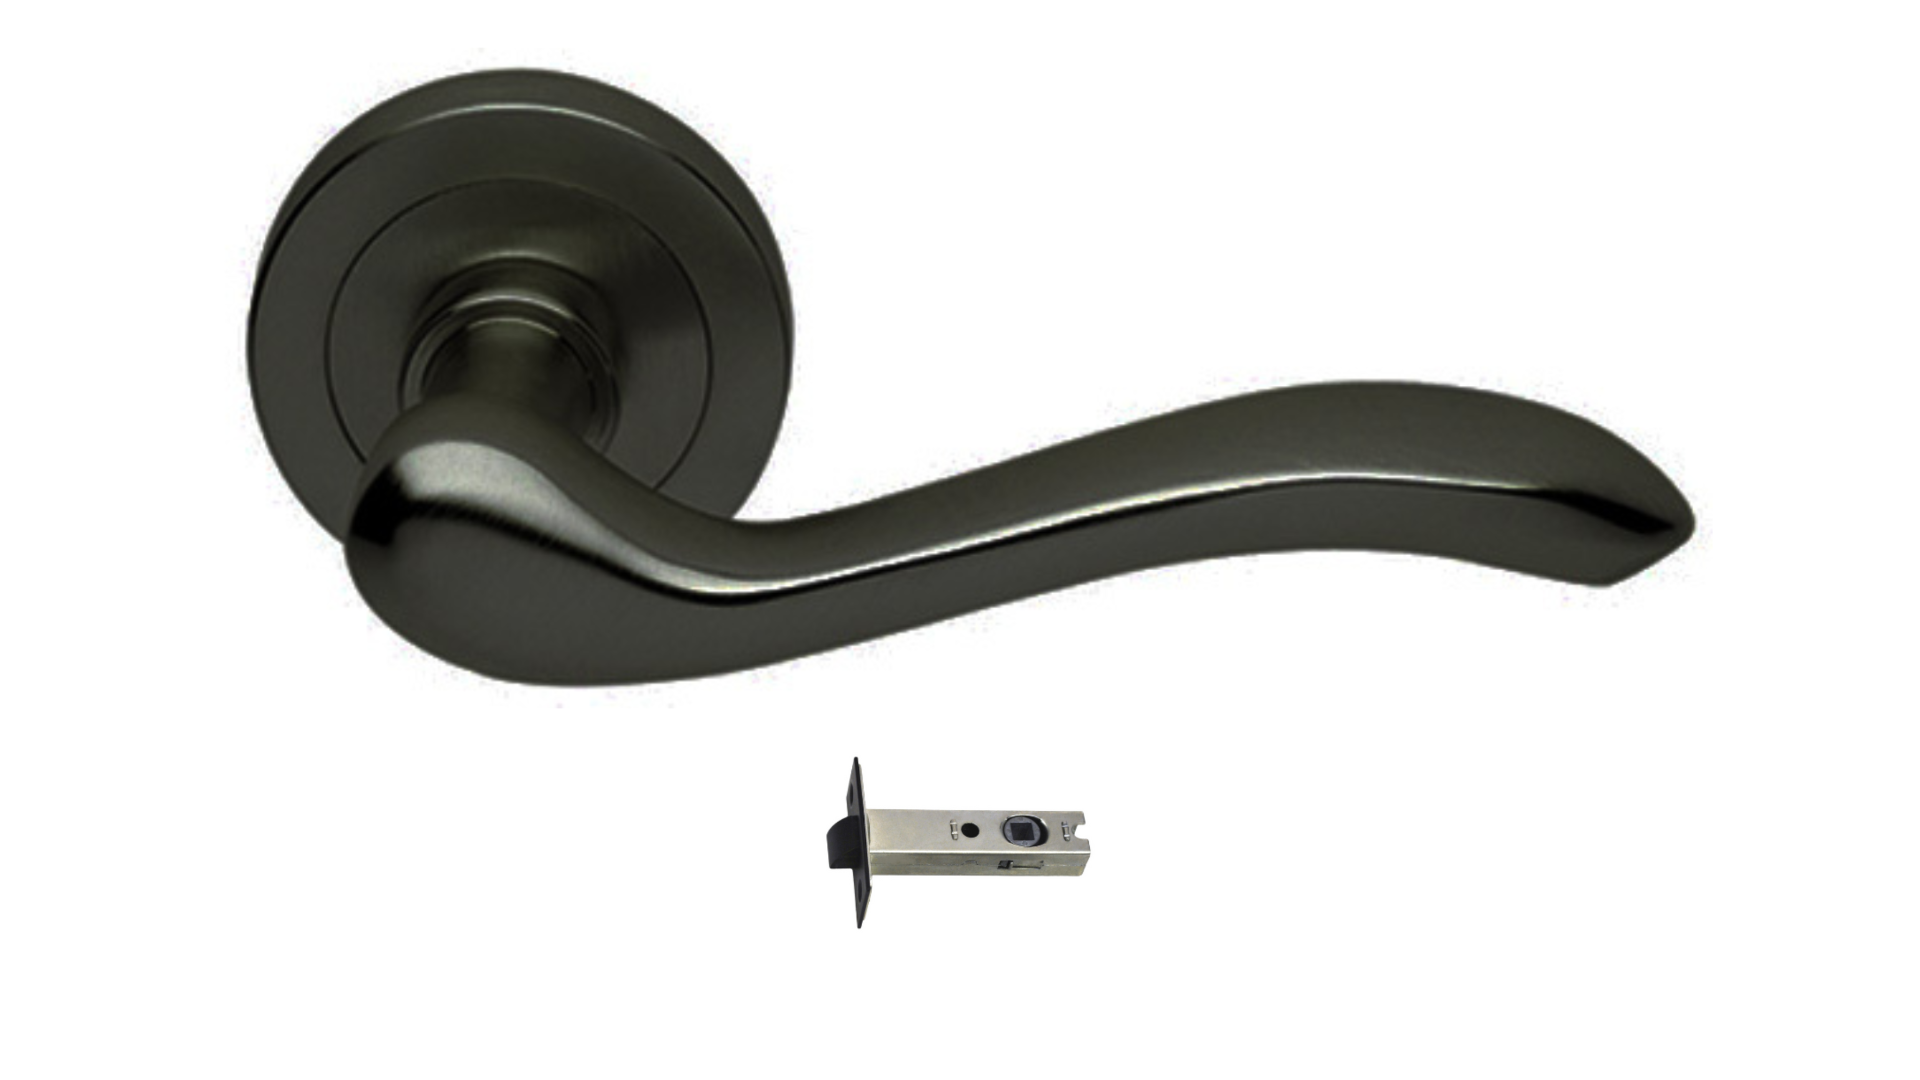 The Erica door handle in Matt Black with a privacy latch underneath on a white background.